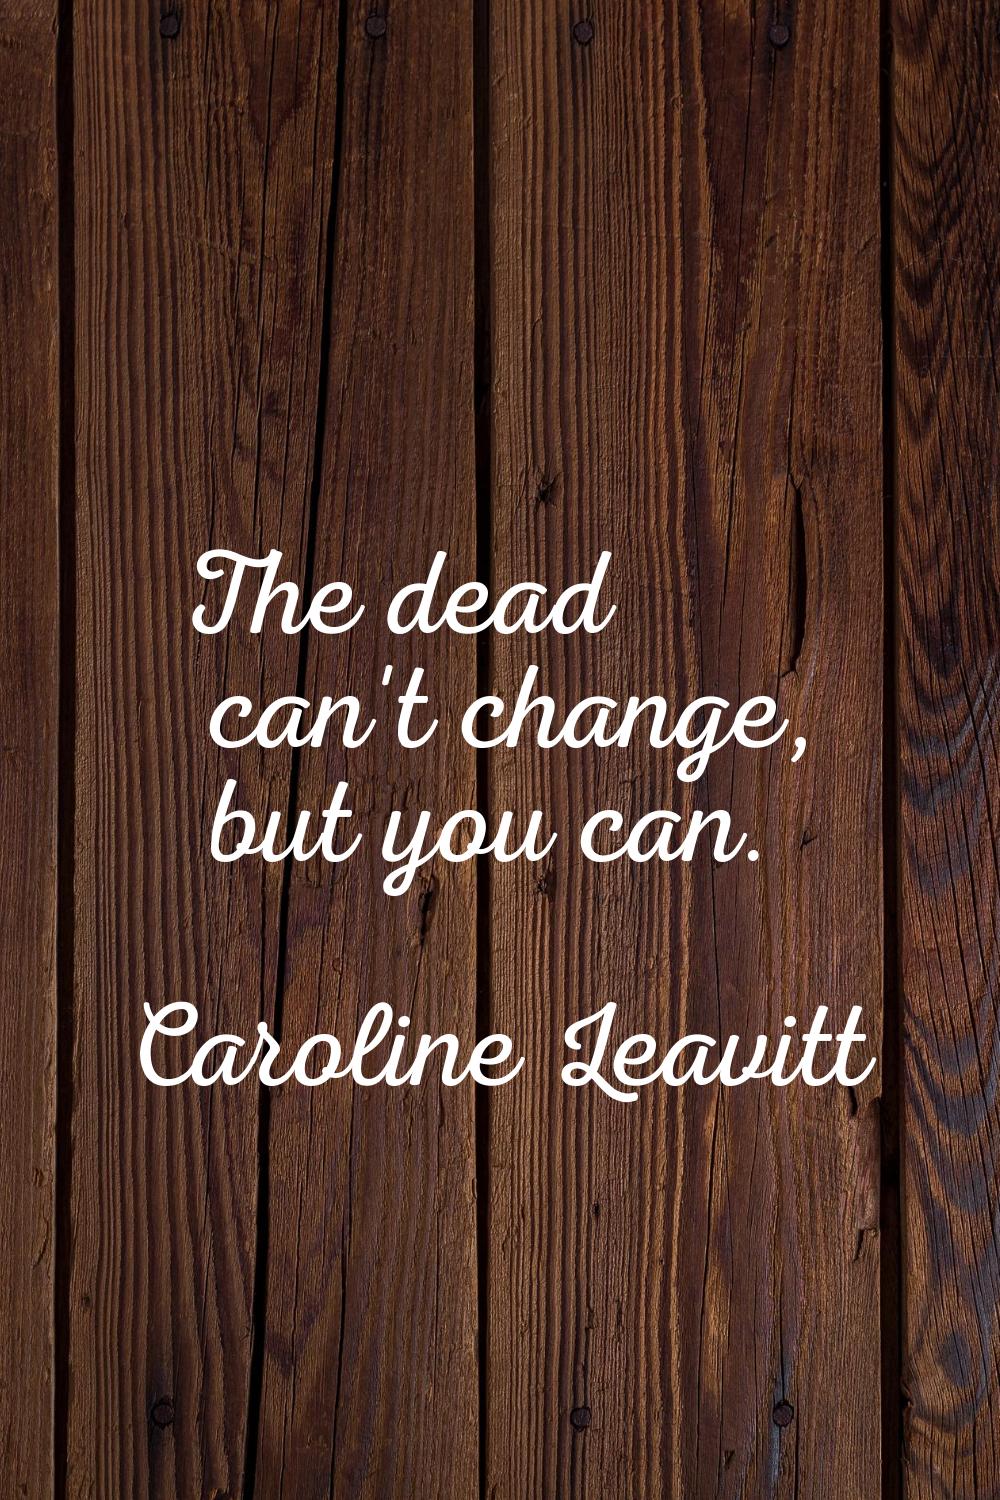 The dead can't change, but you can.